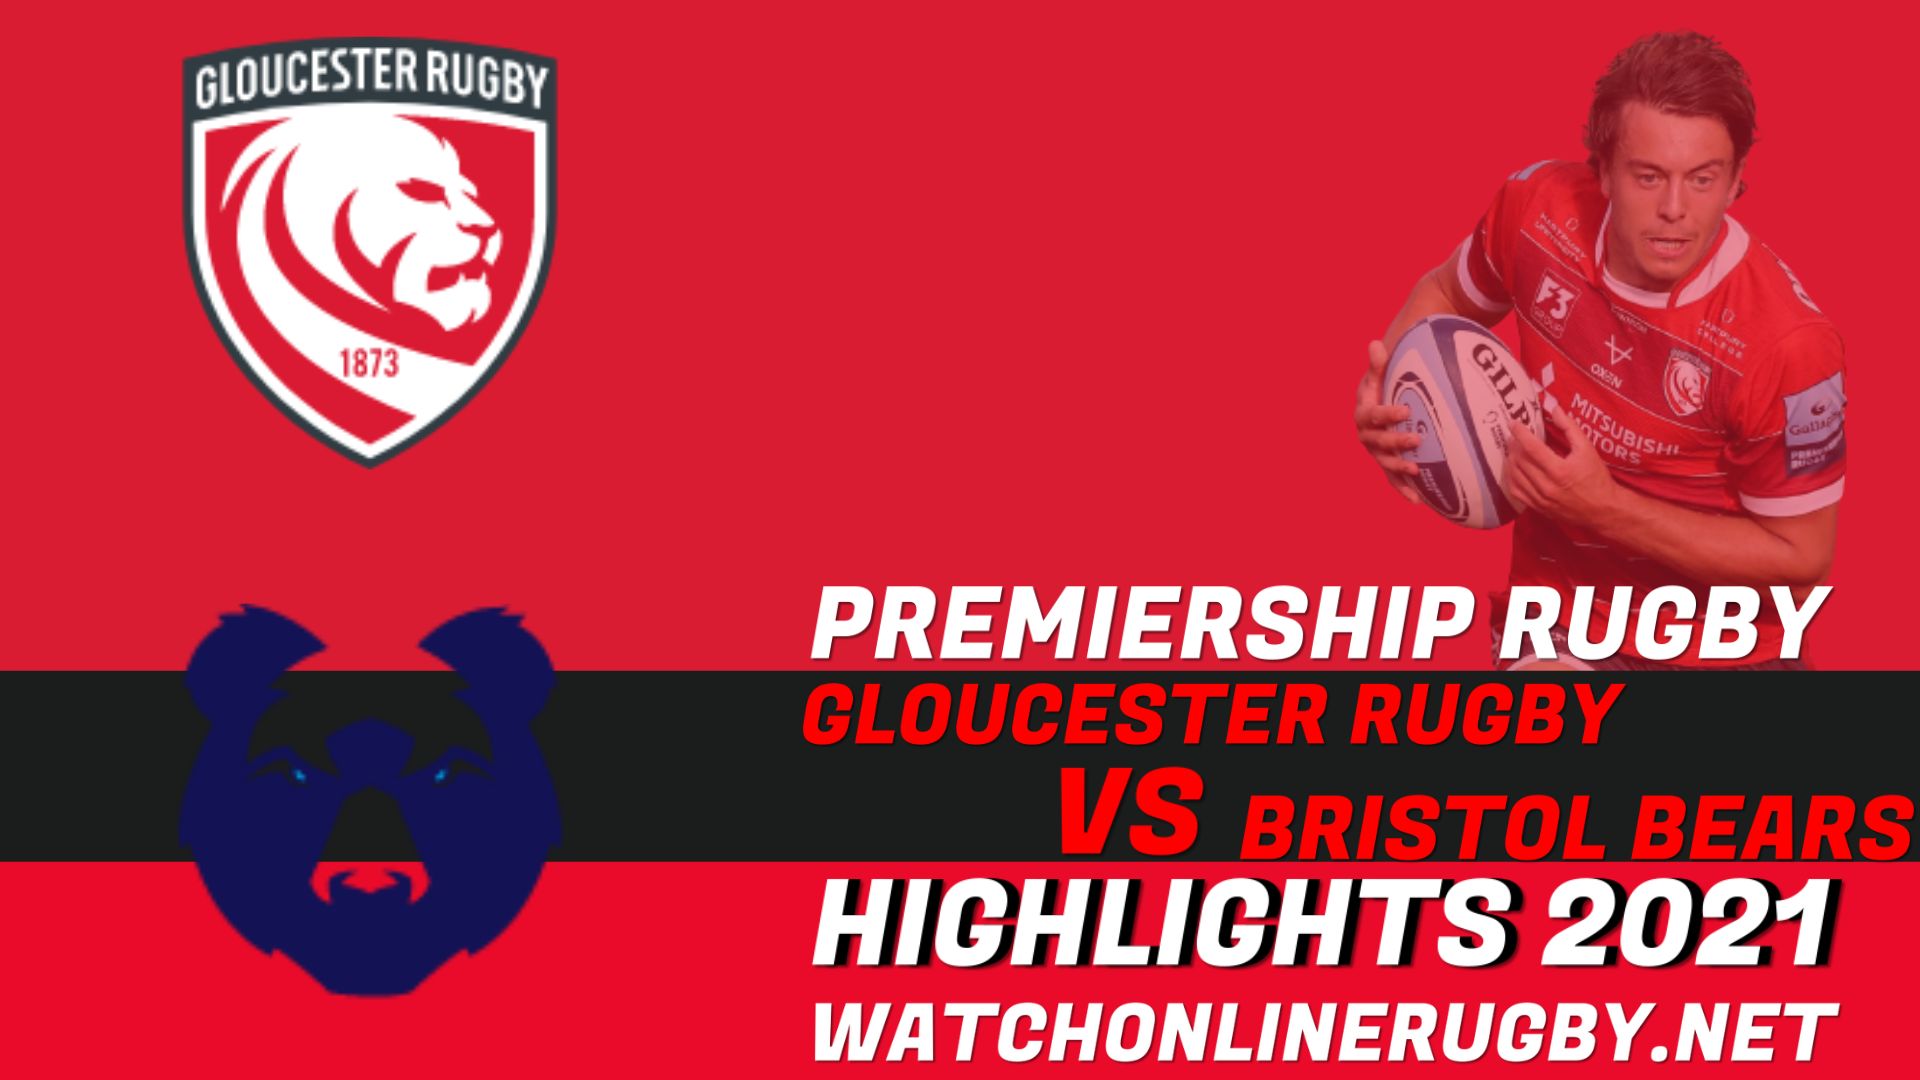 Gloucester Rugby Vs Bristol Bears Premiership Rugby 2021 RD 10